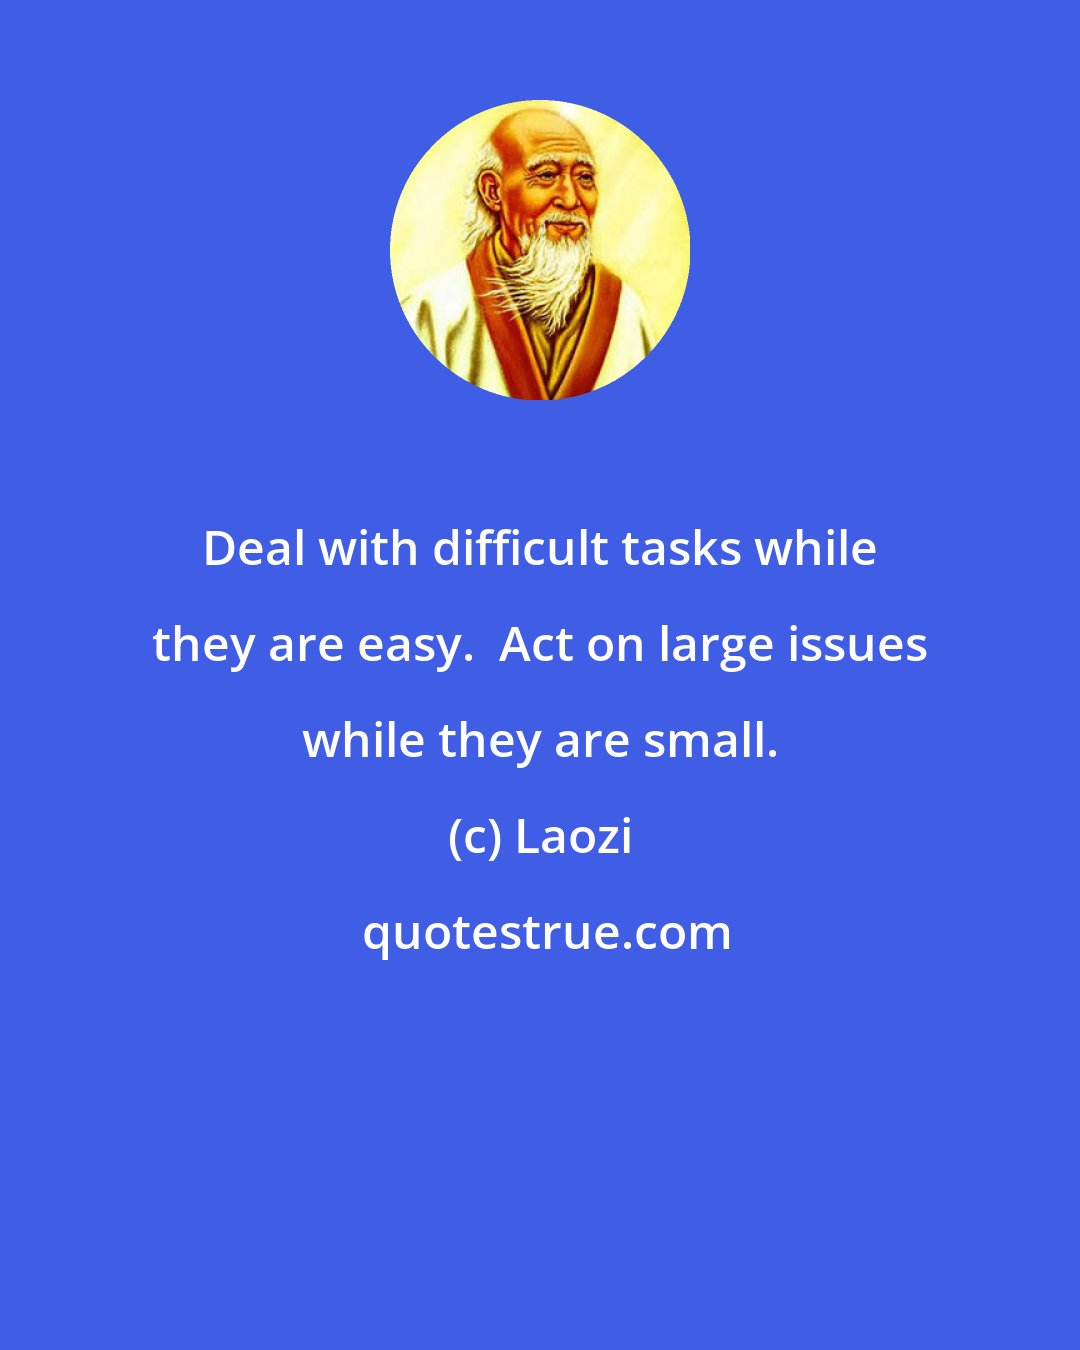 Laozi: Deal with difficult tasks while they are easy.  Act on large issues while they are small.